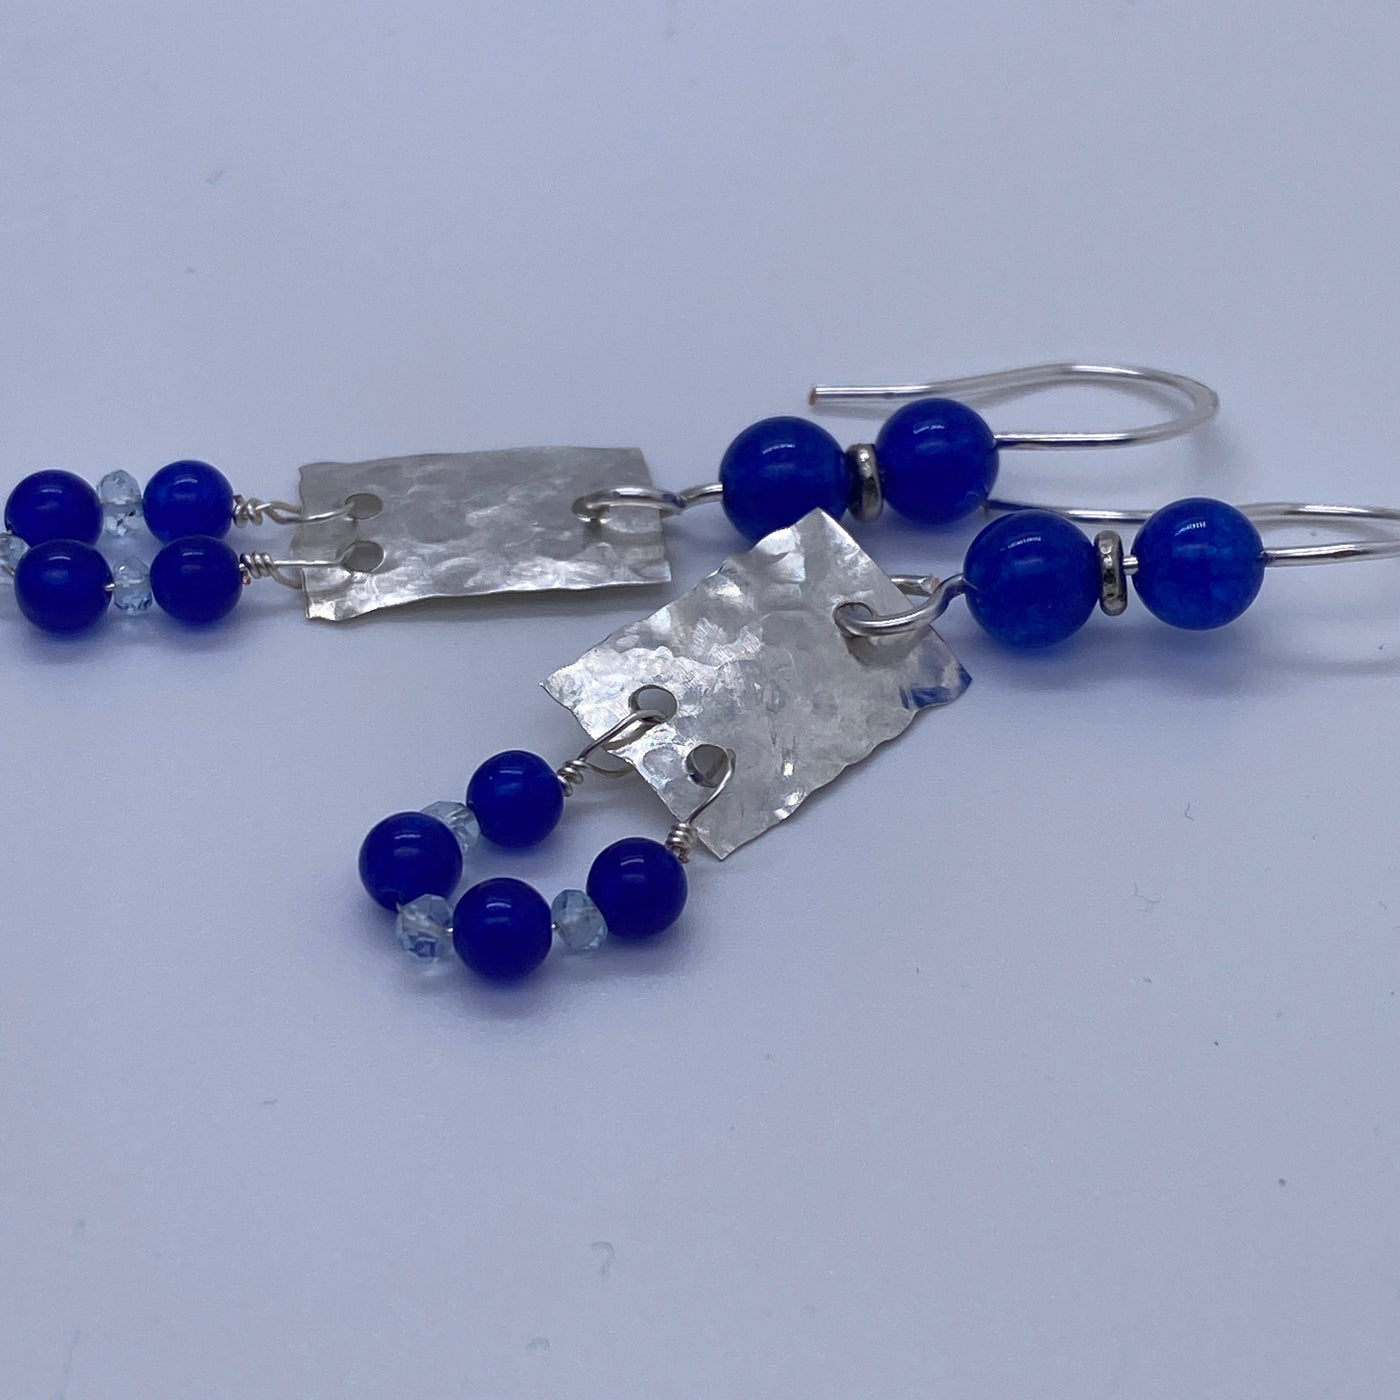 Blue calchedony agate and acquamarine on silver earrings